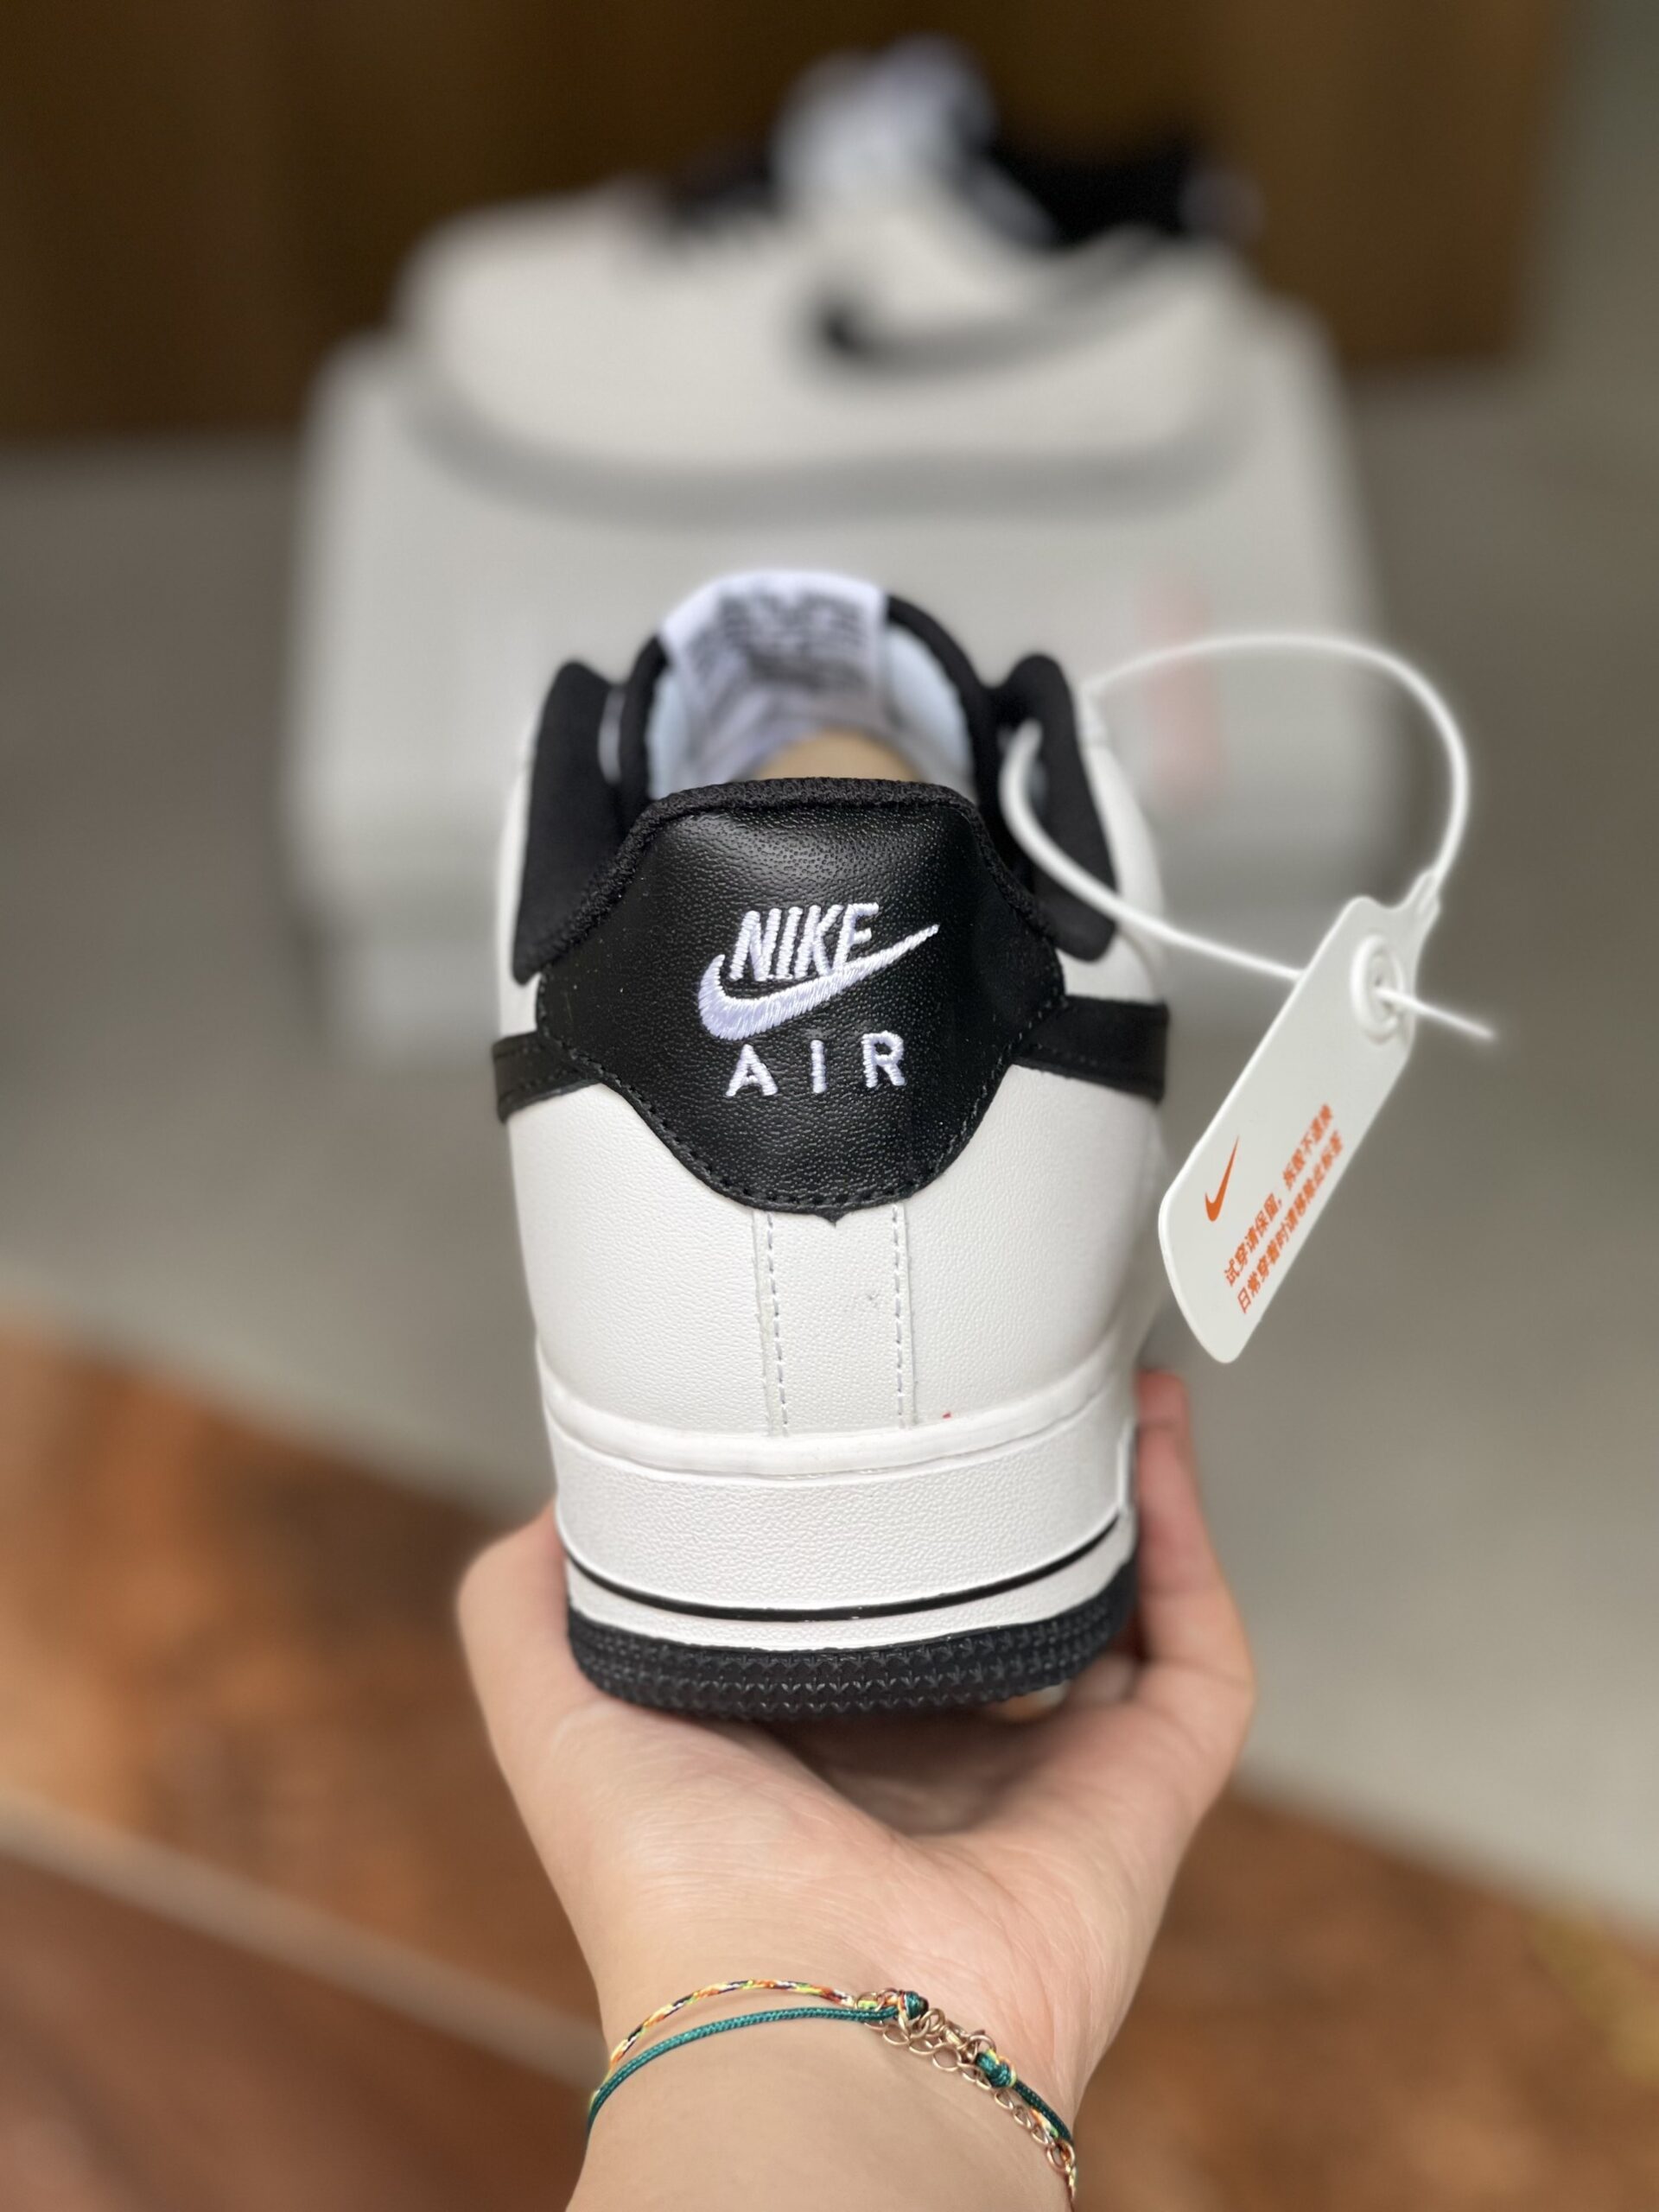 Giày Nike Air Force 1 Low 07 White Black Best Quality